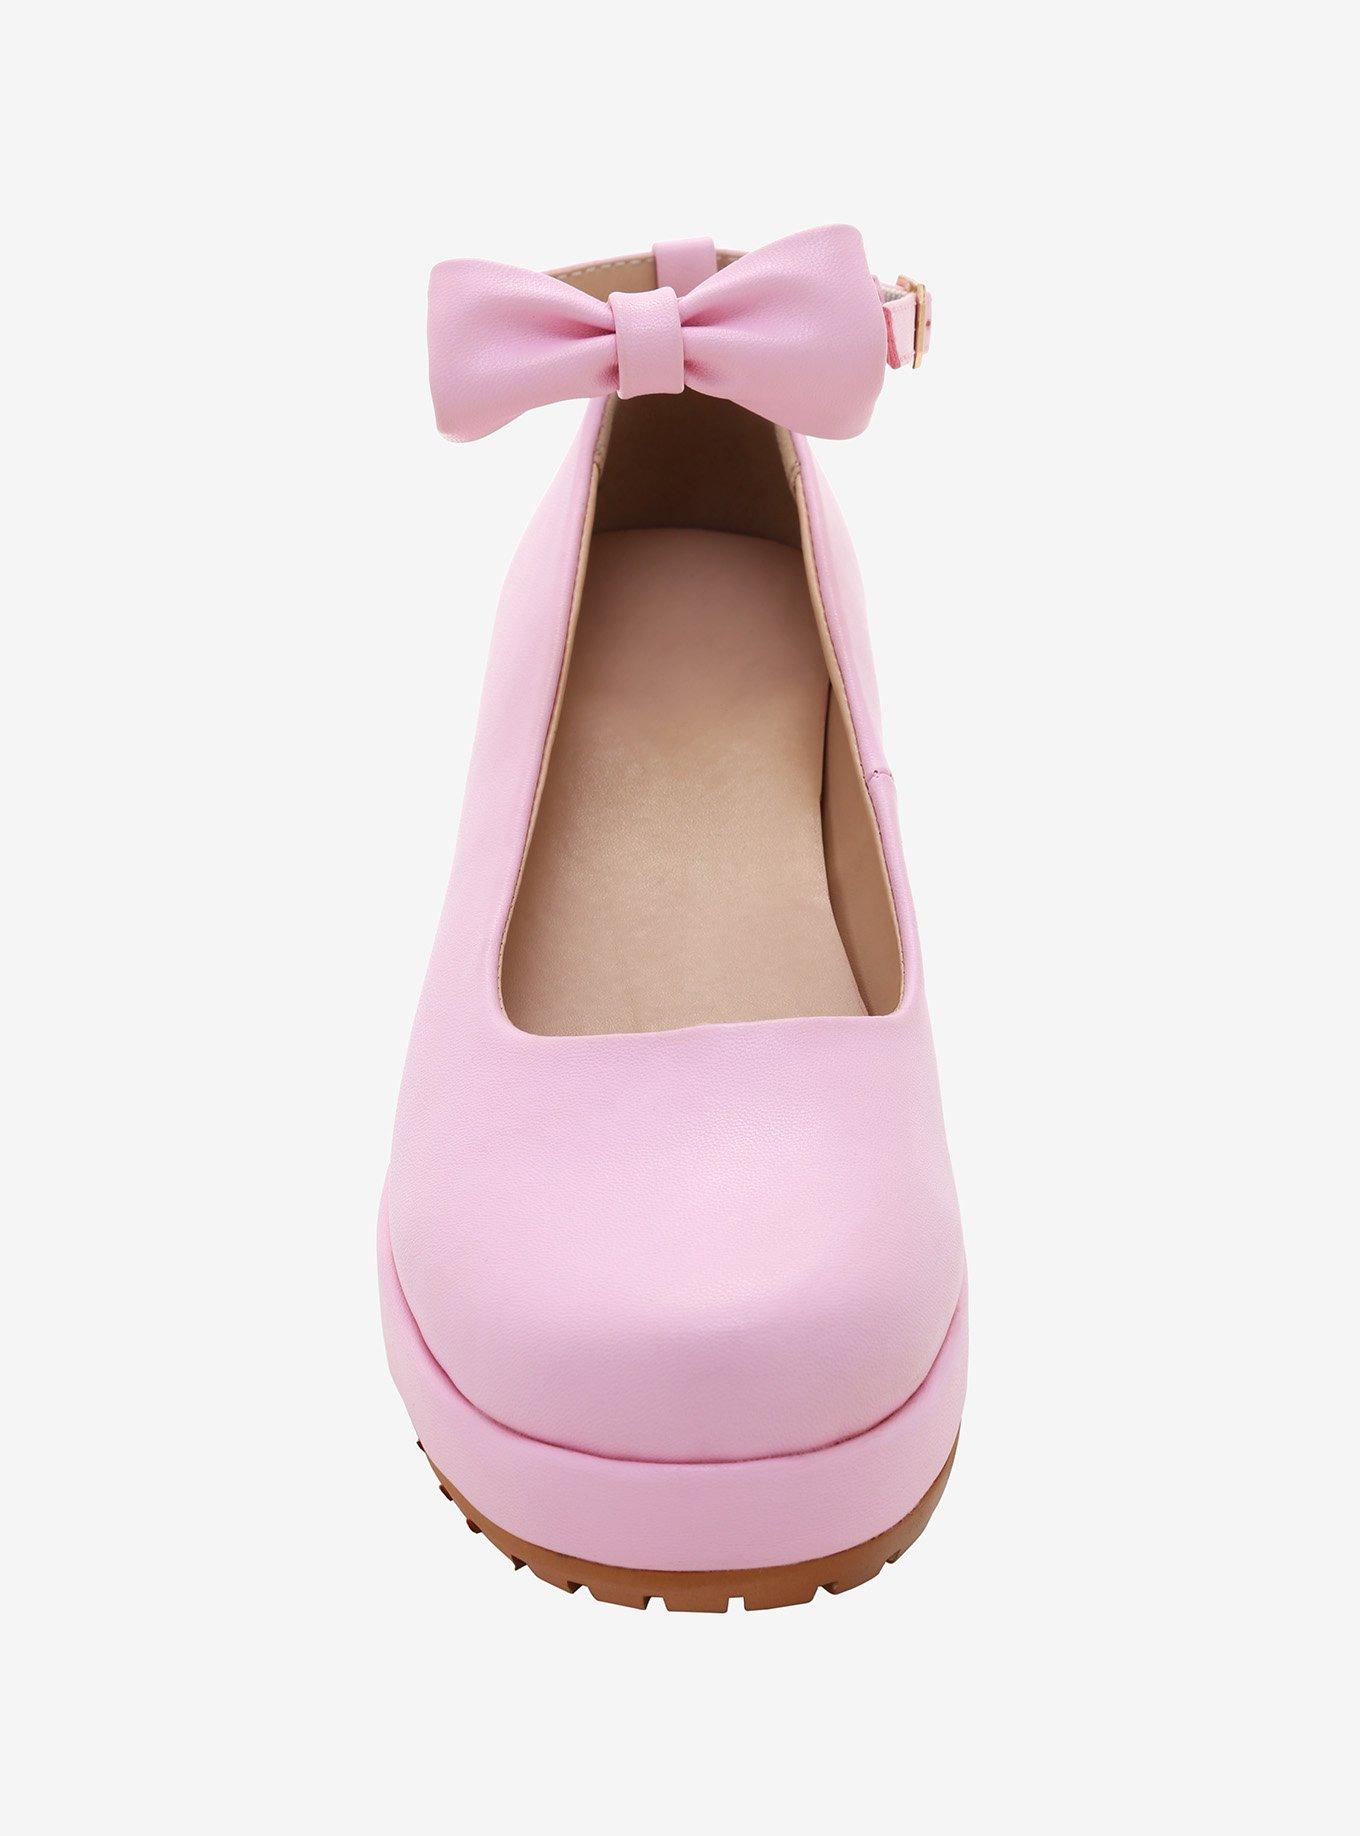 Pink Ankle Strap & Bow Heeled Mary Janes, PINK, alternate